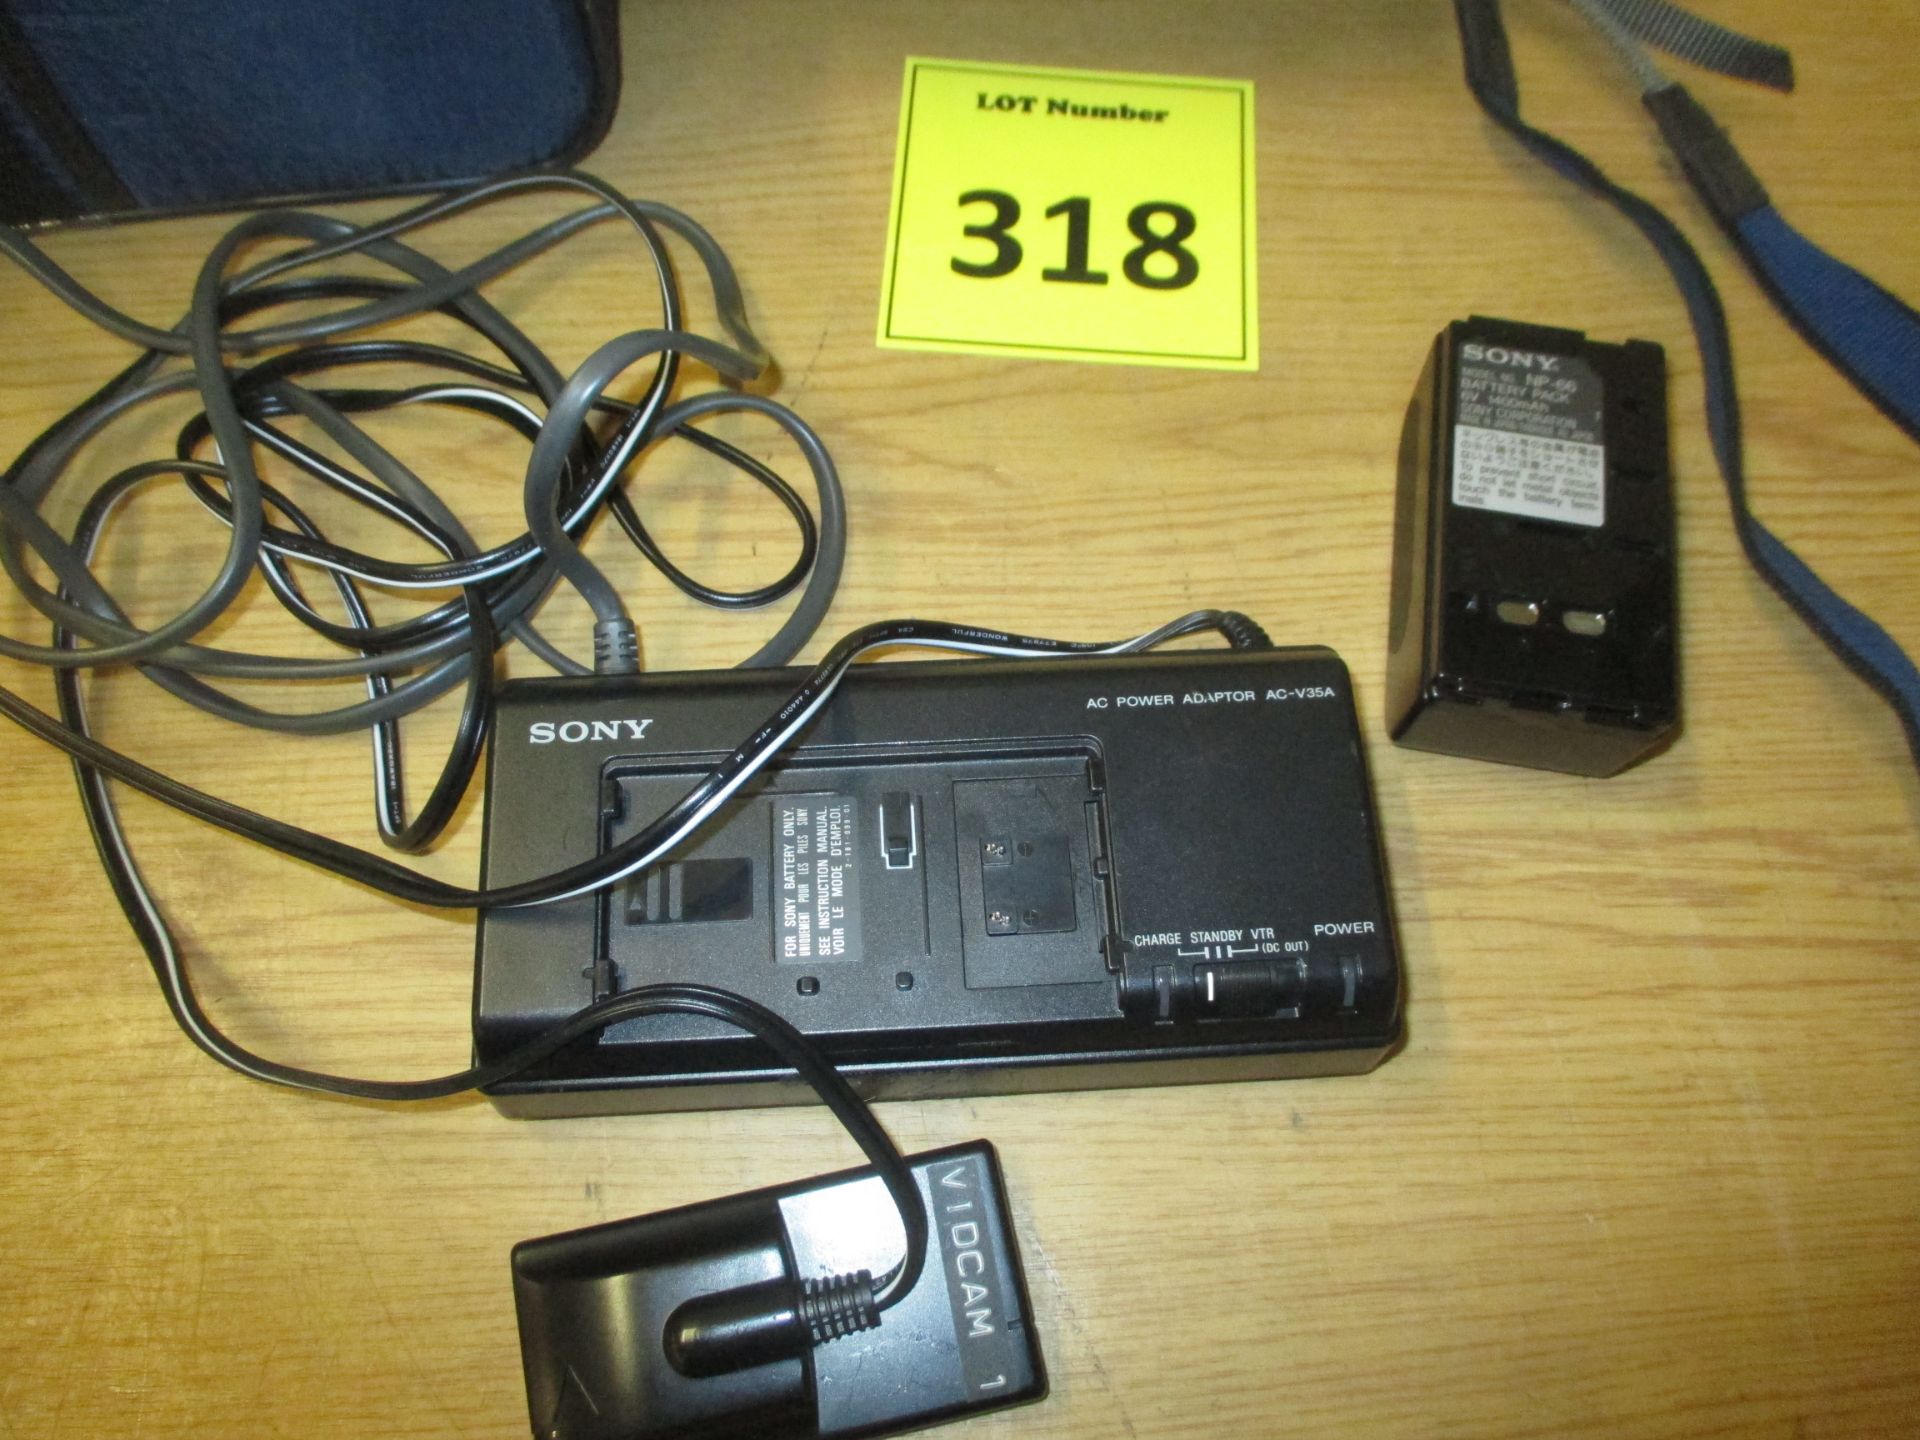 SONY HANDYCAM VIDEO HI8 MODEL MODEL CCD-TR2000E. COMPLETE WITH CHARGER, BATTERY REMOTE CONTROL & - Image 3 of 4